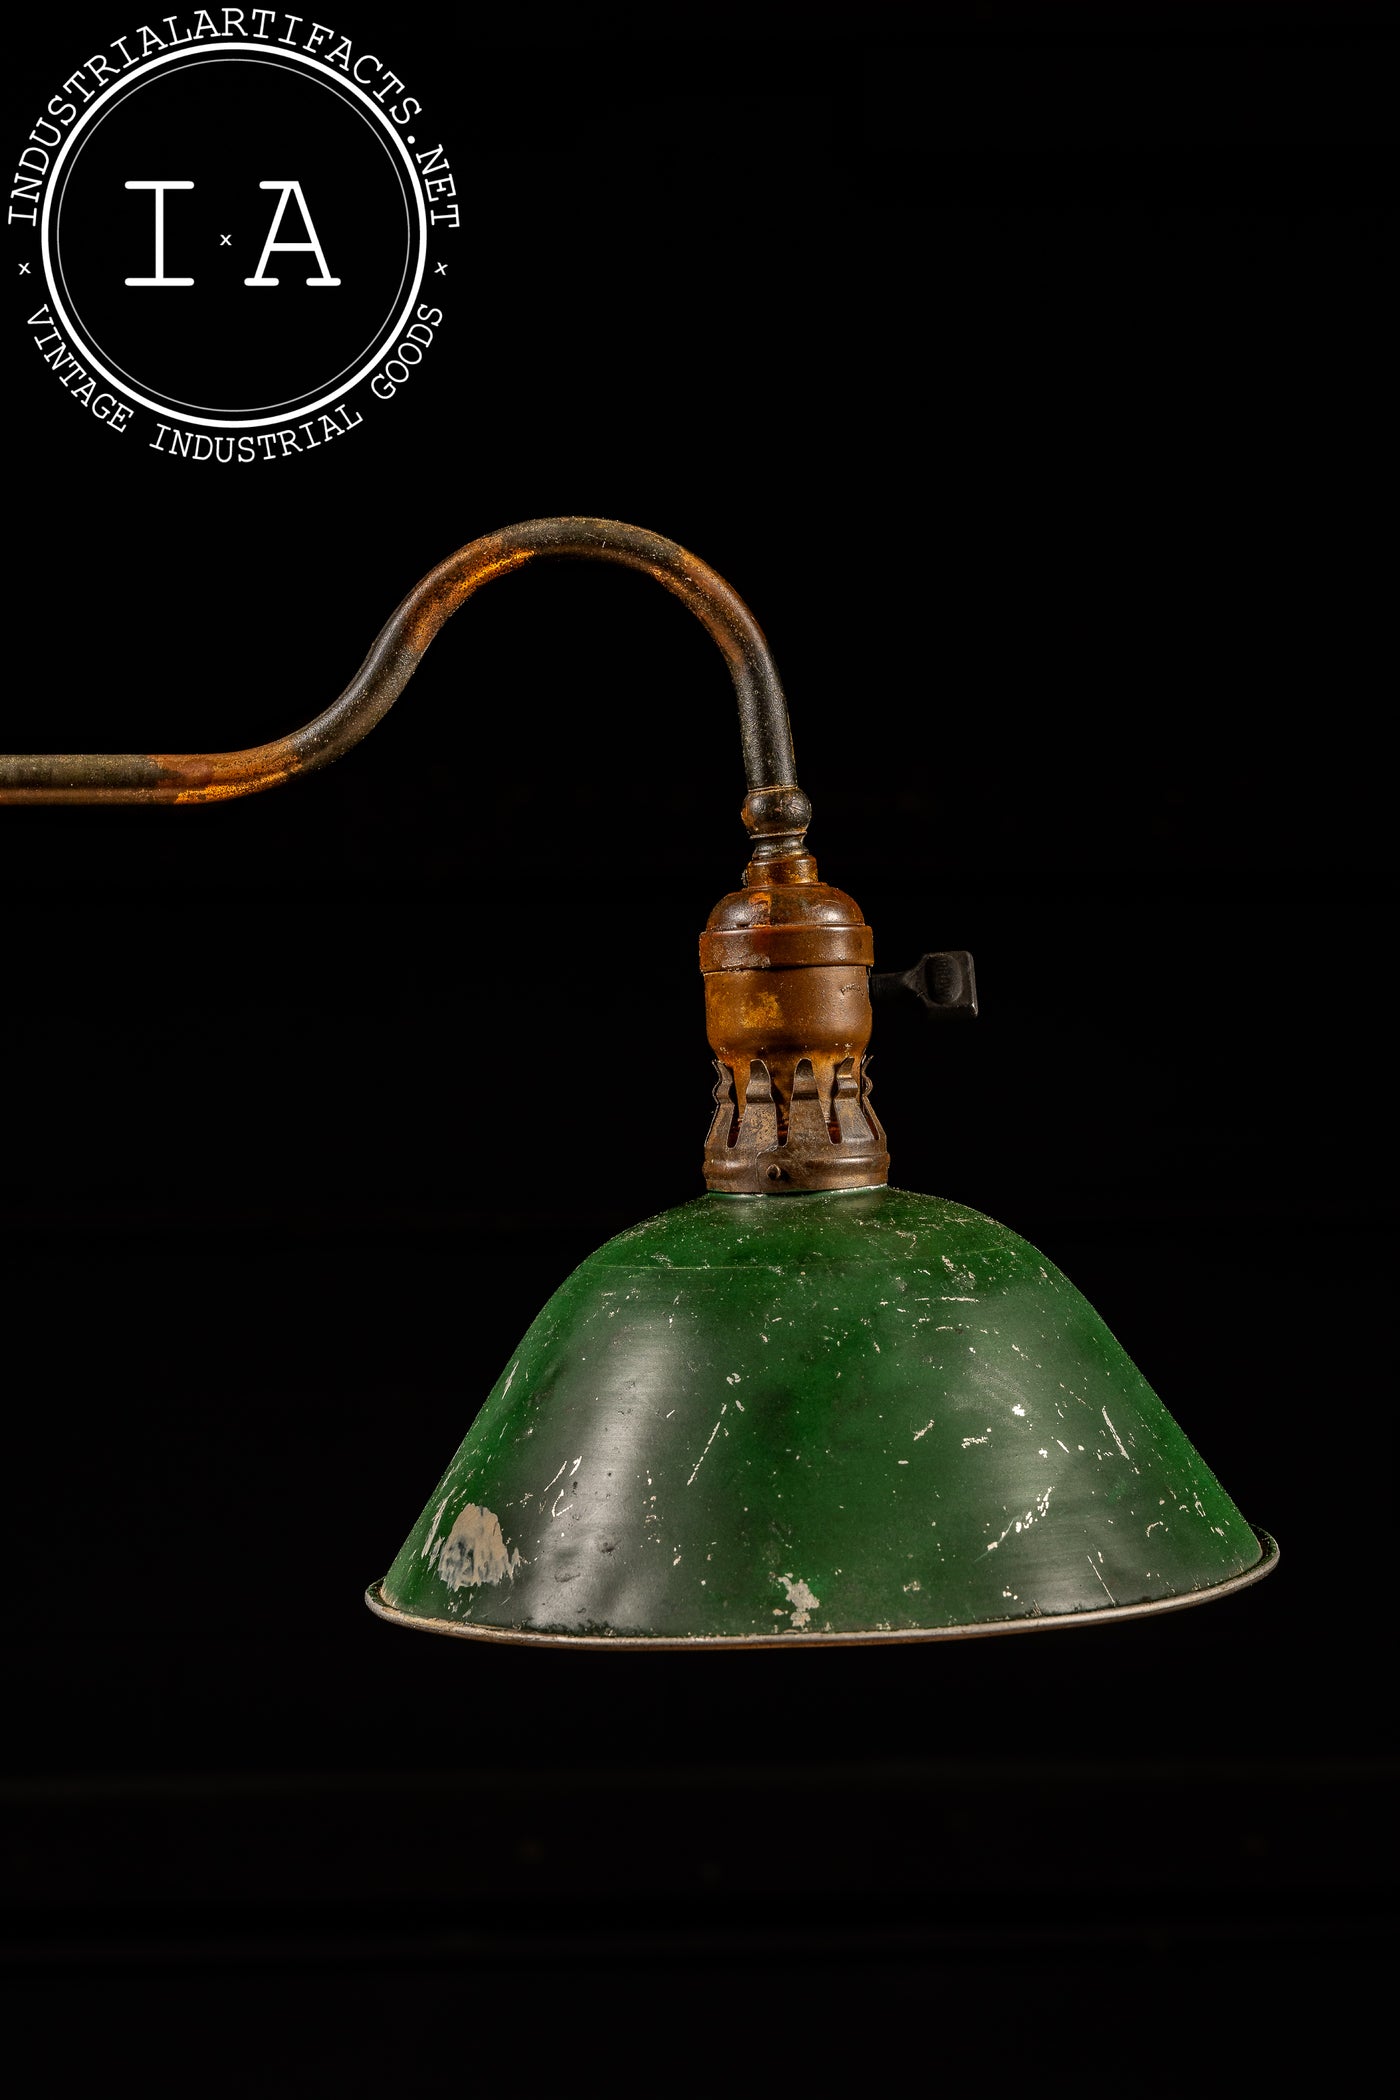 Antique Japanned Copper Lamp With Faries "Bell" Shade